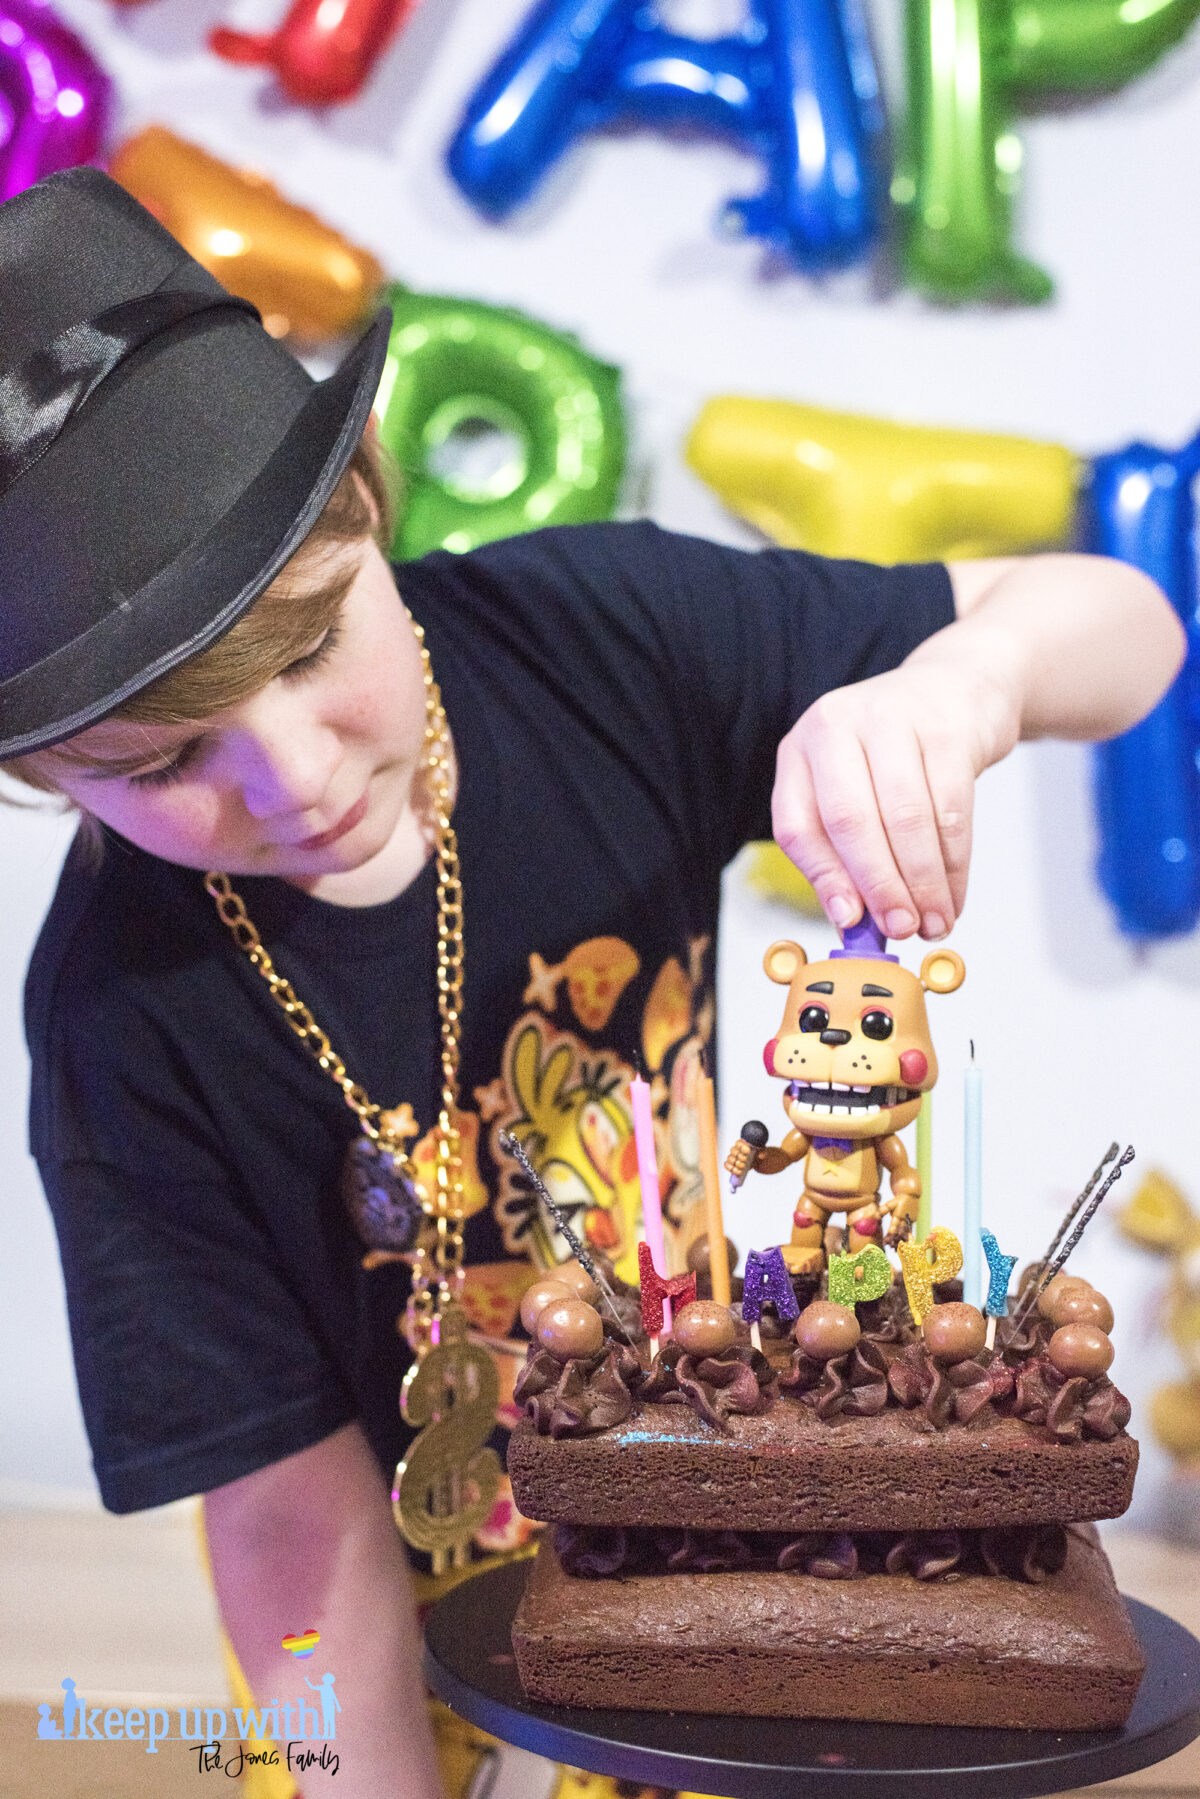 Image shows a blond haired boy wearing a black FNAF chica t-shirt and black top hat with a gold chain. 
 He is peering over a chocolate cake. He is lifting a Freddy Fazbear's Funko Pop Vinyl figure from Five Nights at Freddy's off the cake.